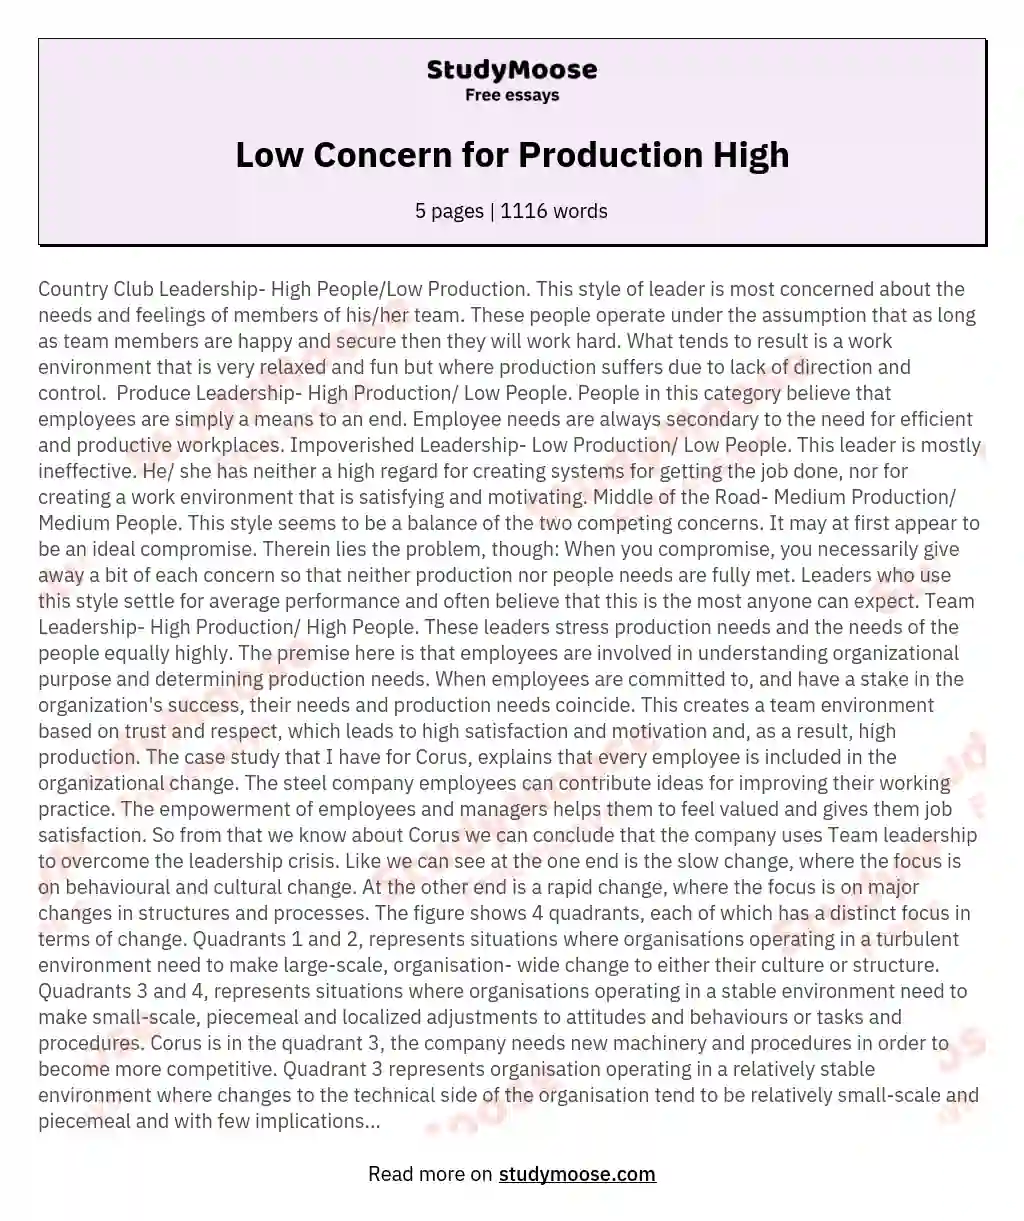 Low Concern for Production High essay